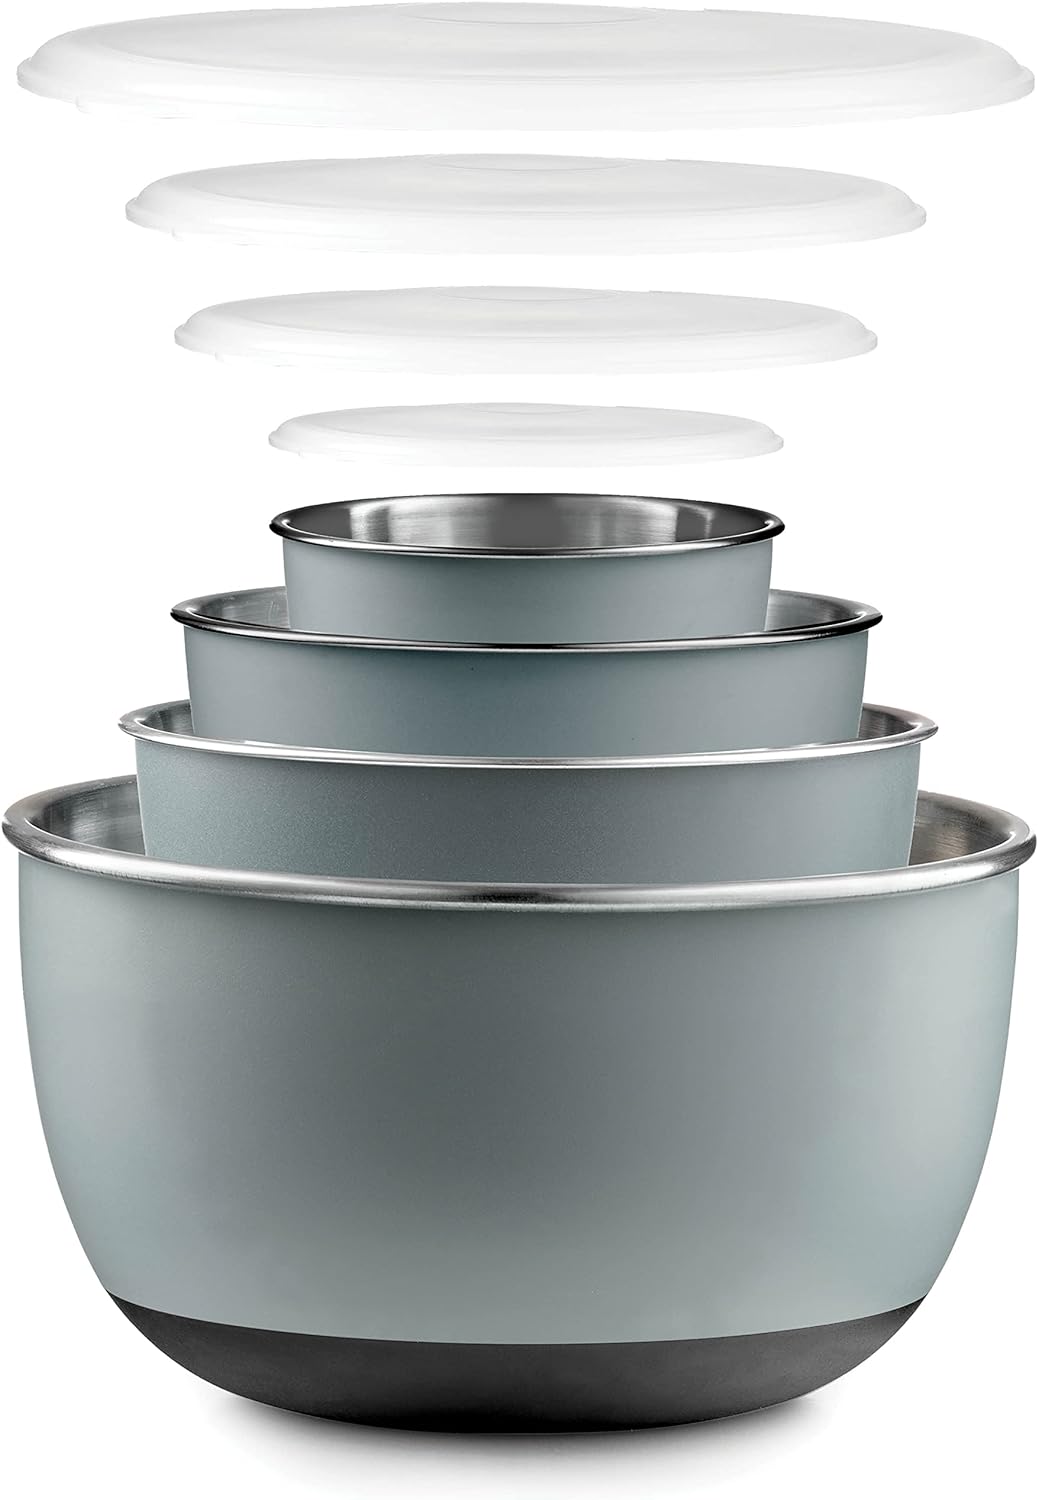 Stainless Steel Mixing Bowls with Lids Set, Stackable Nesting Dishware Bowls for Kitchen Space Storage Saving, Non-Slip Bottoms for Stability, 5 Quarts Salad Bowls